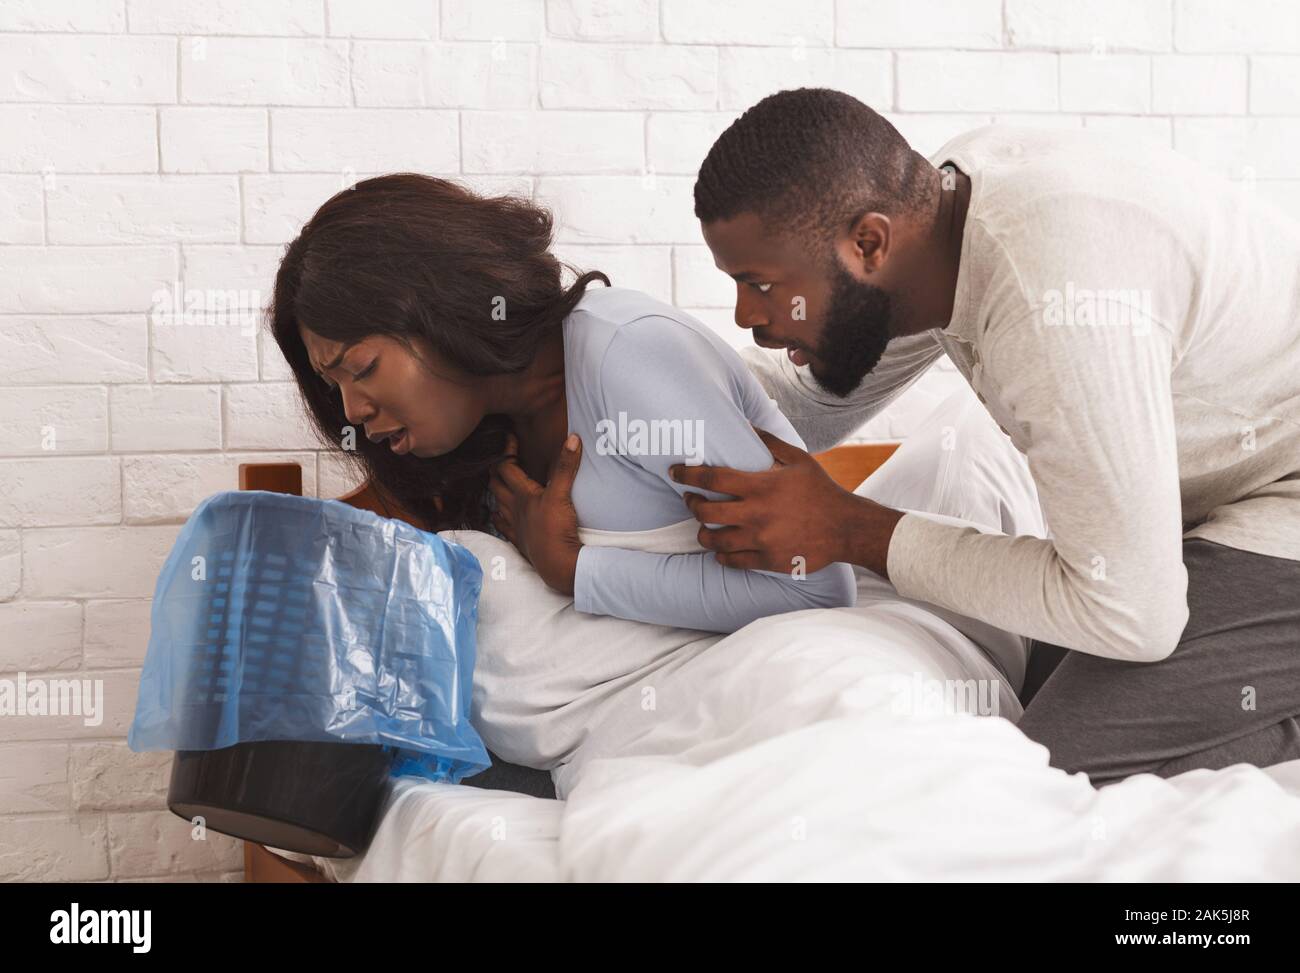 Morning sickness. Young pregnant african woman sitting on bed, holding trash, feeling nauseous during pregnancy, her man comforting her Stock Photo